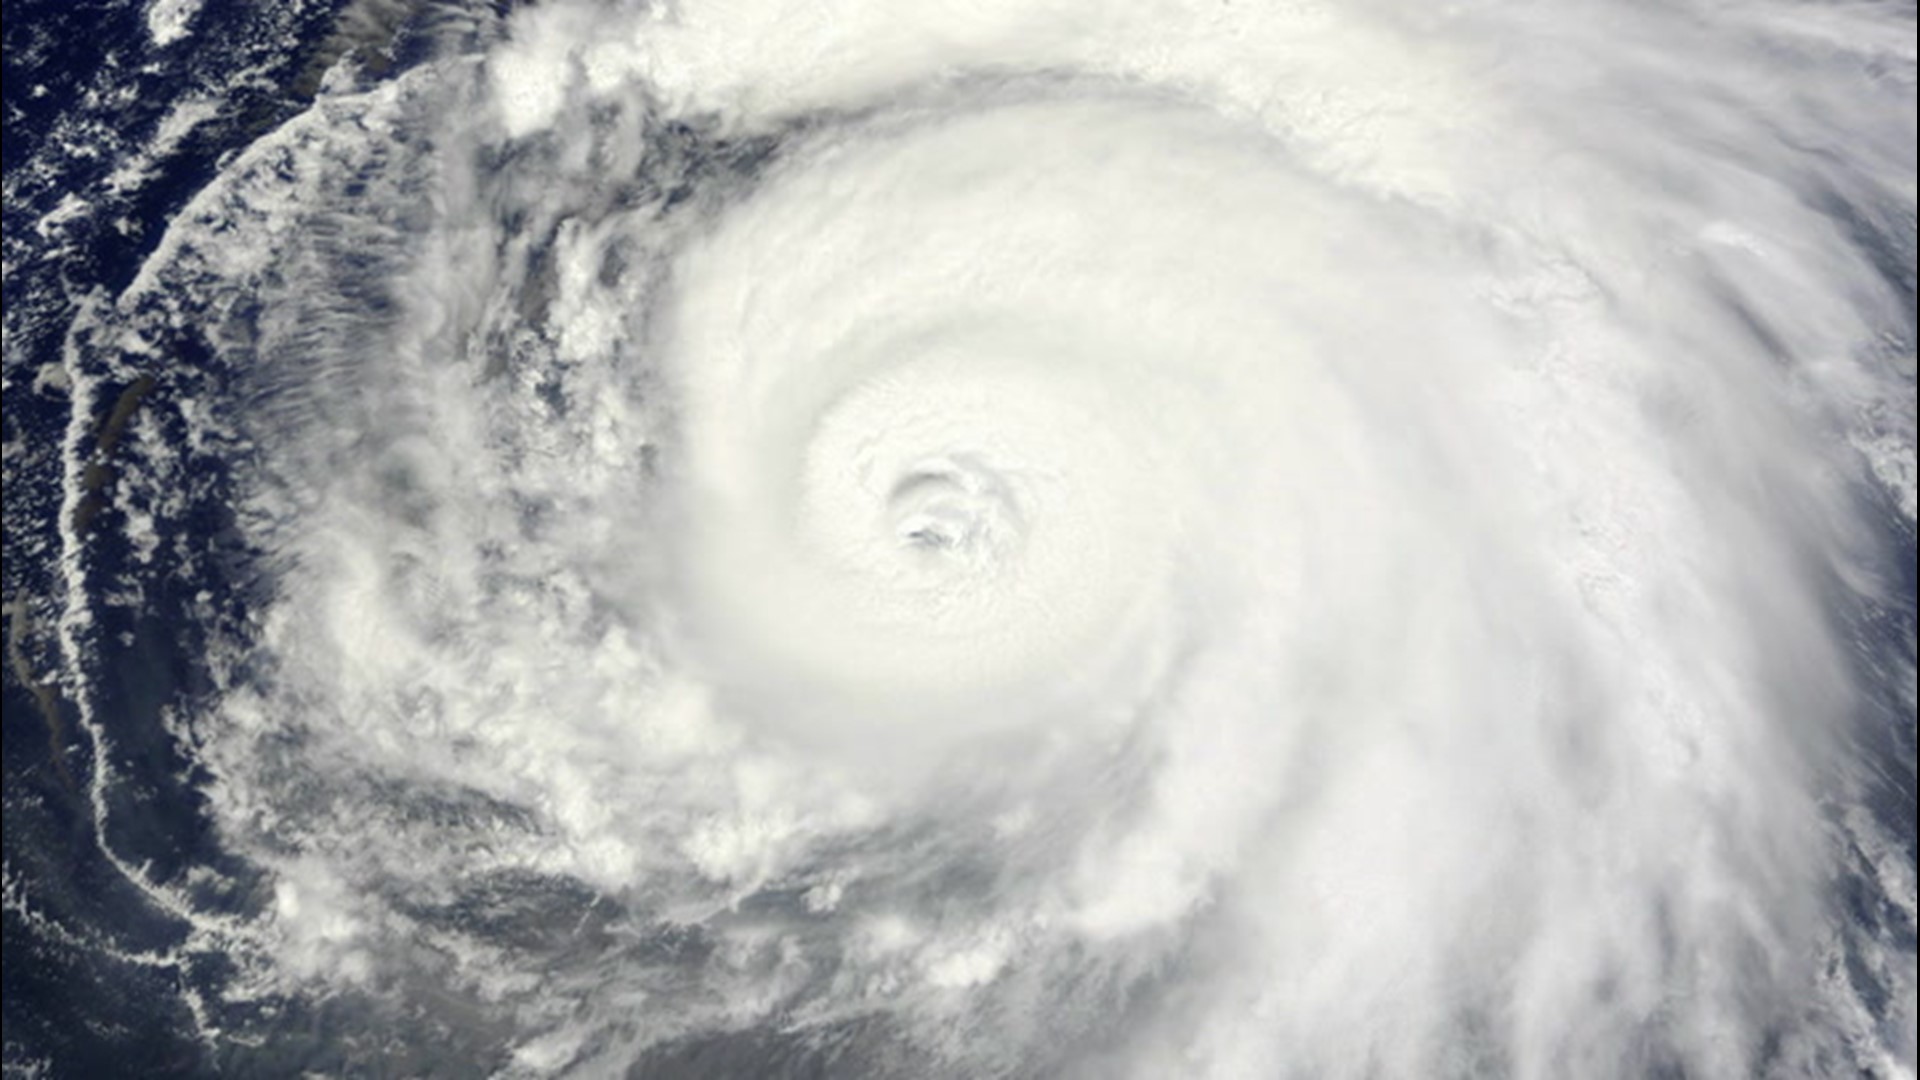 Meteorologists use many terms to identify storms in the tropics, like tropical depressions and even hurricanes. What are the stages of tropical cyclones?